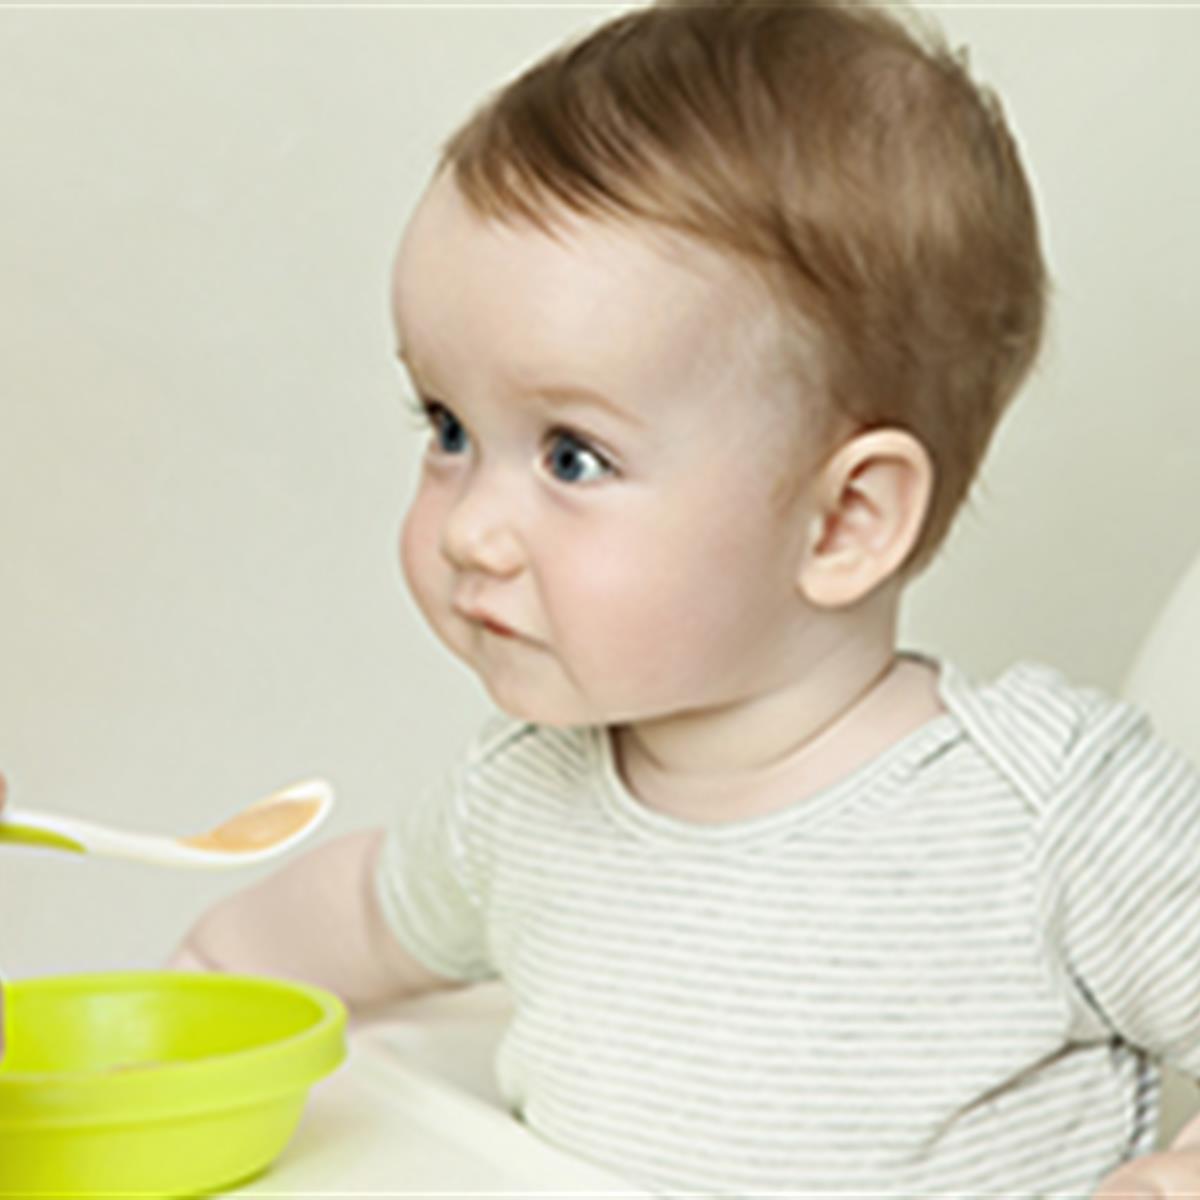 When to start feeding your baby peanut butter, milk, and other